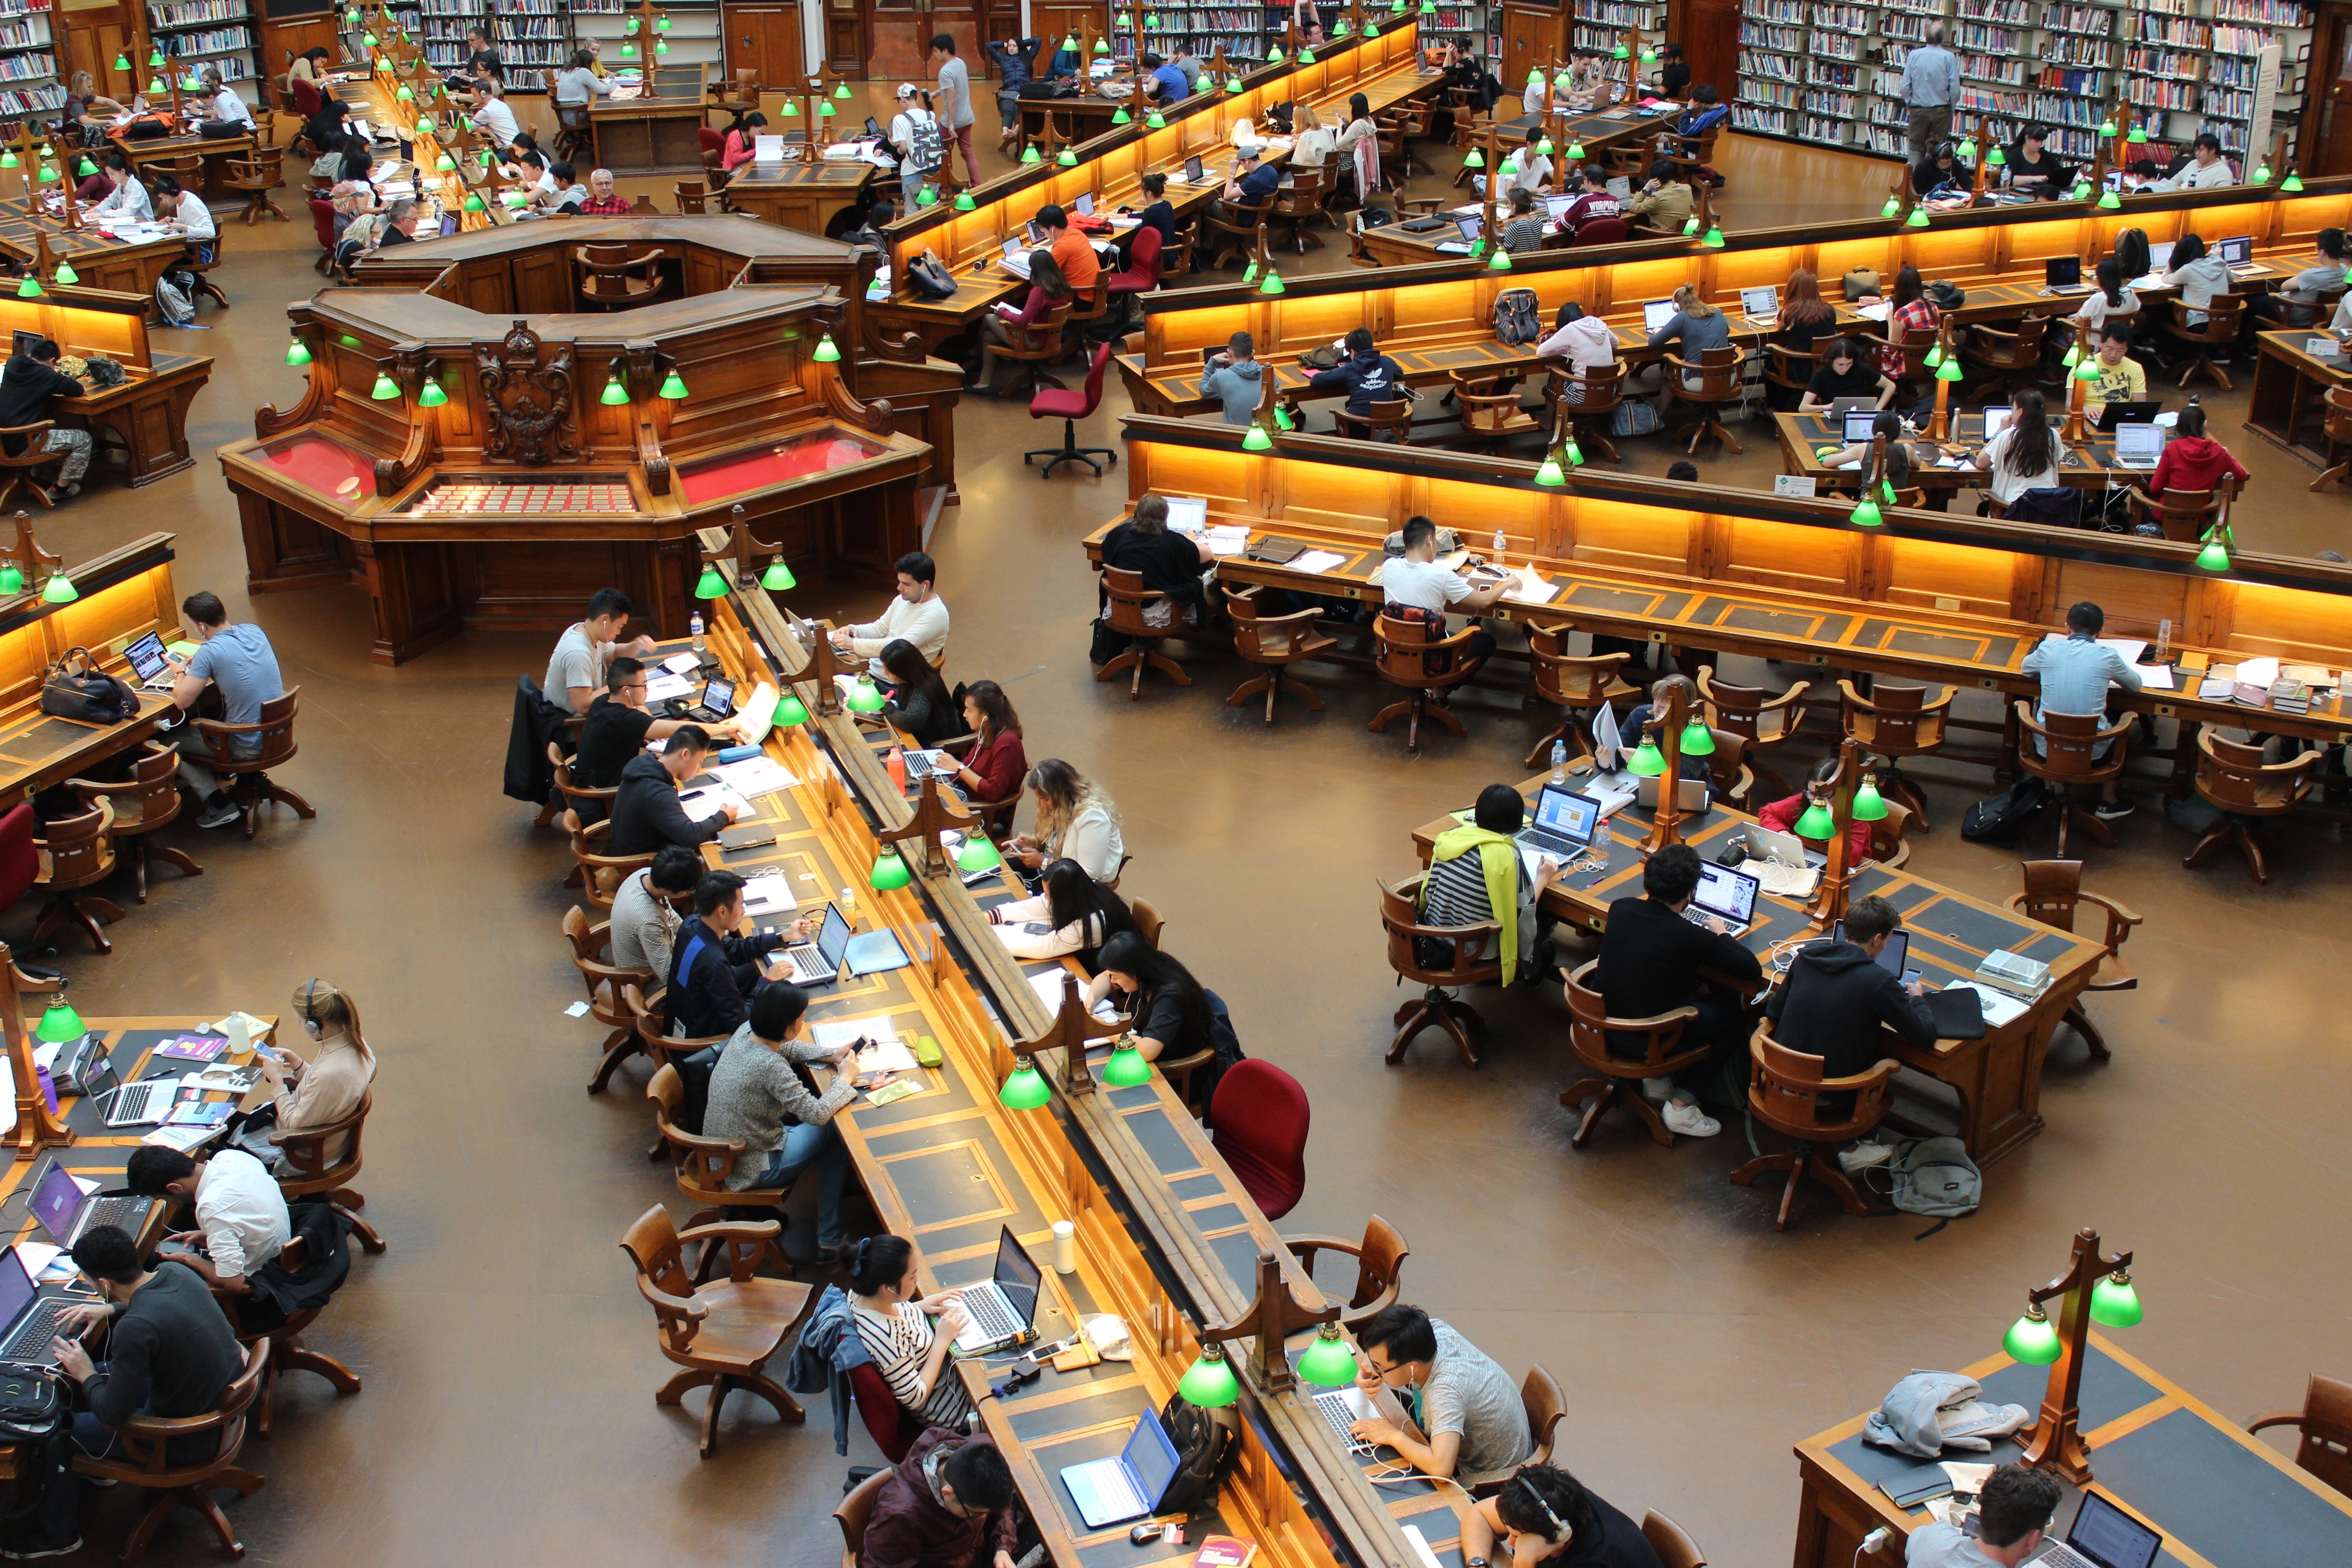 A photo of students studying in a campus library